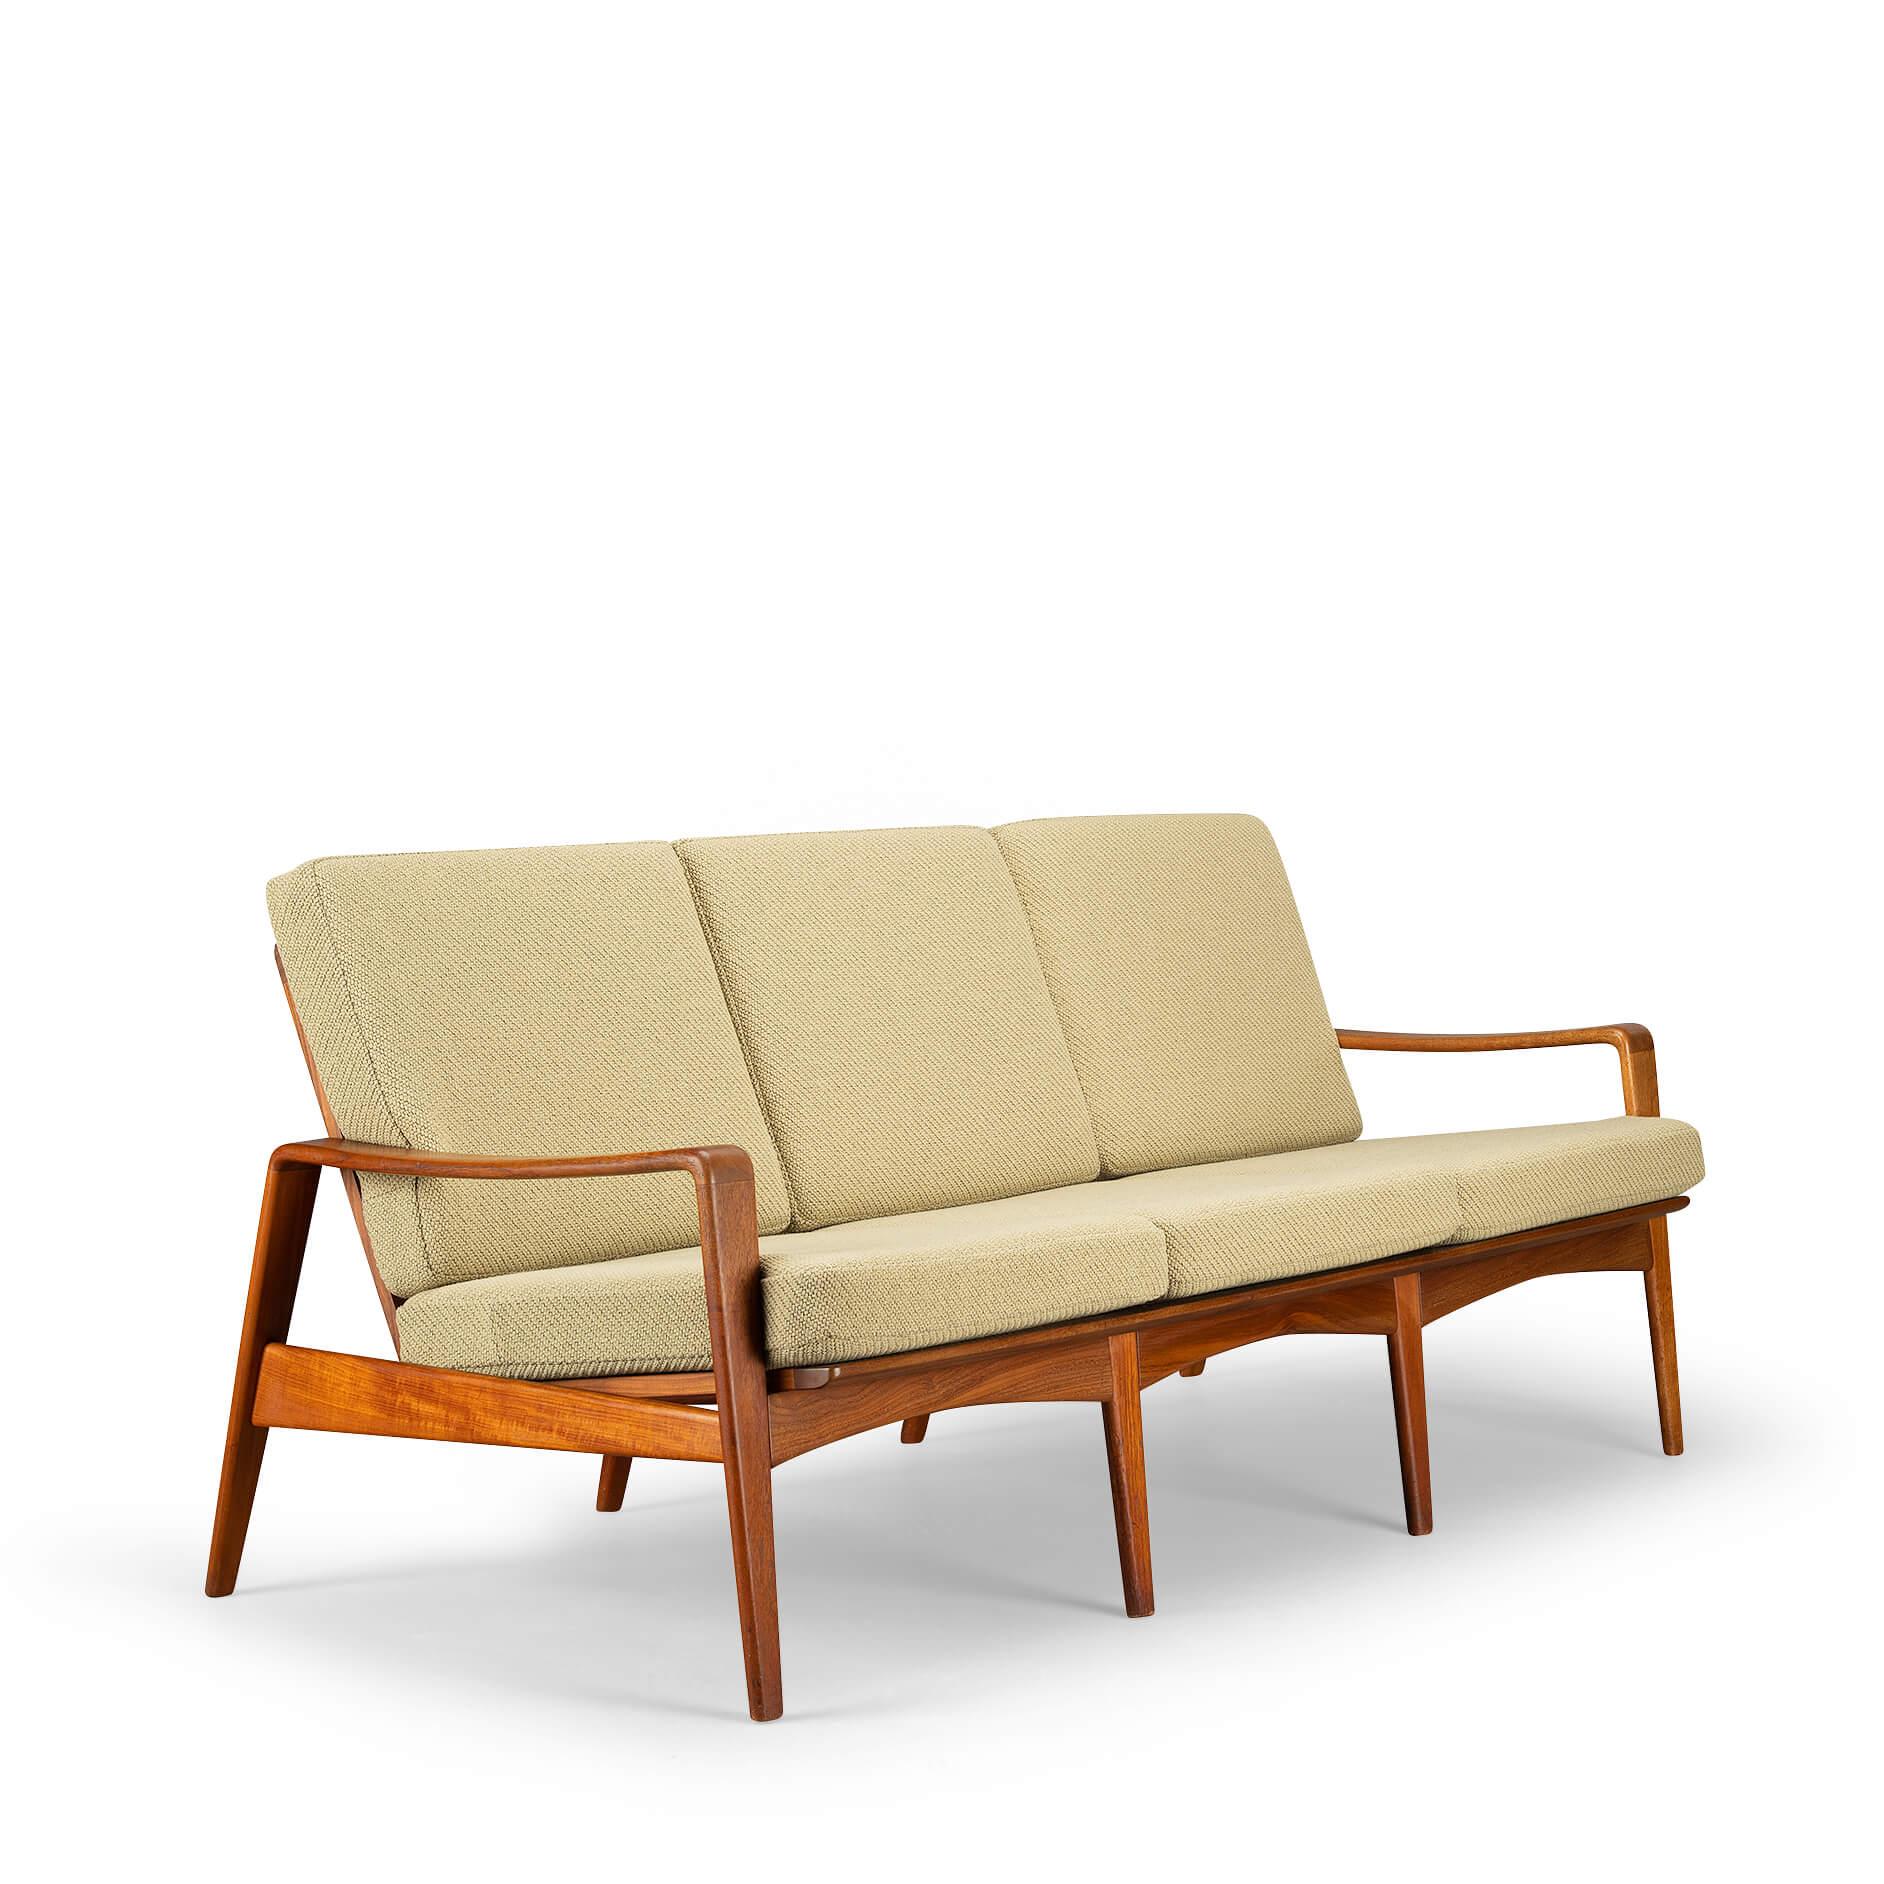 Mid-Century Modern Danish Reupholstered Sofa by Model No. 35 by Arne Wahl Iversen, 1960s For Sale